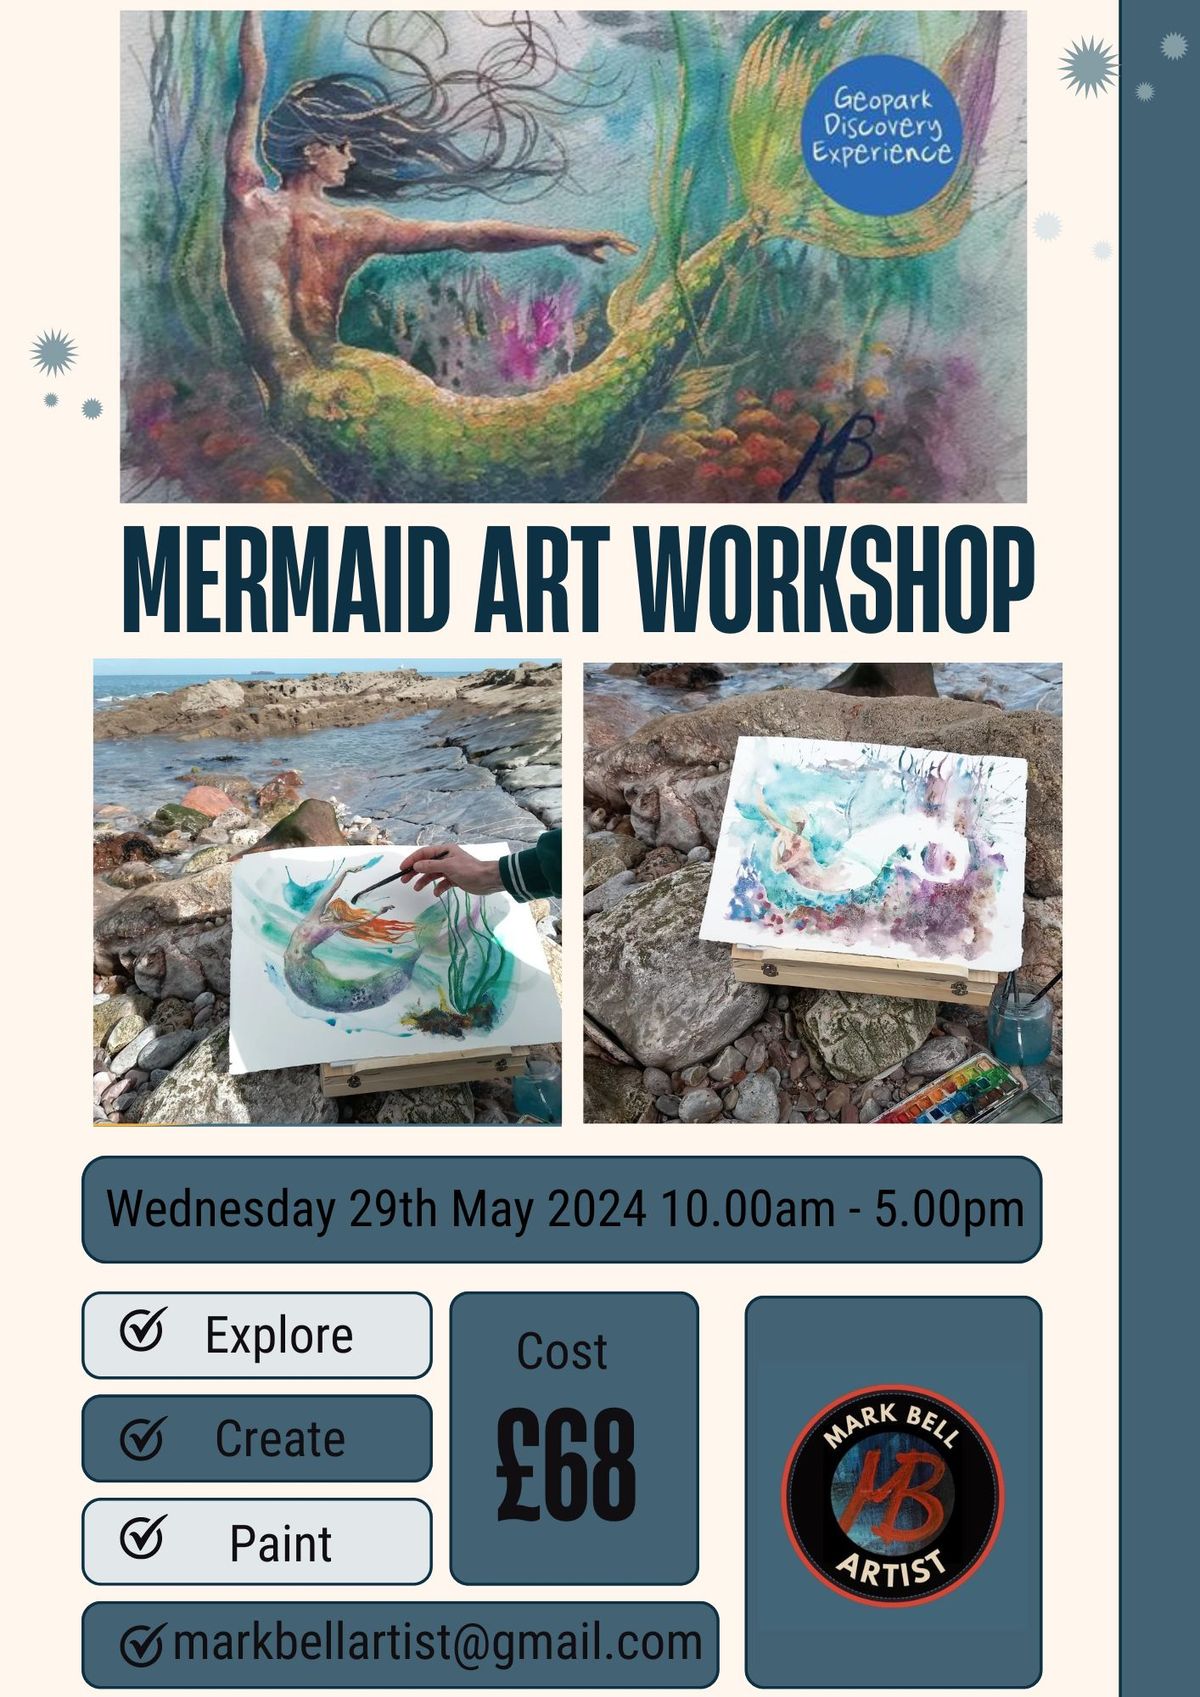 Mermaid Art Workshop with Mark Bell - Brixham - Wednesday 29th May 2024 